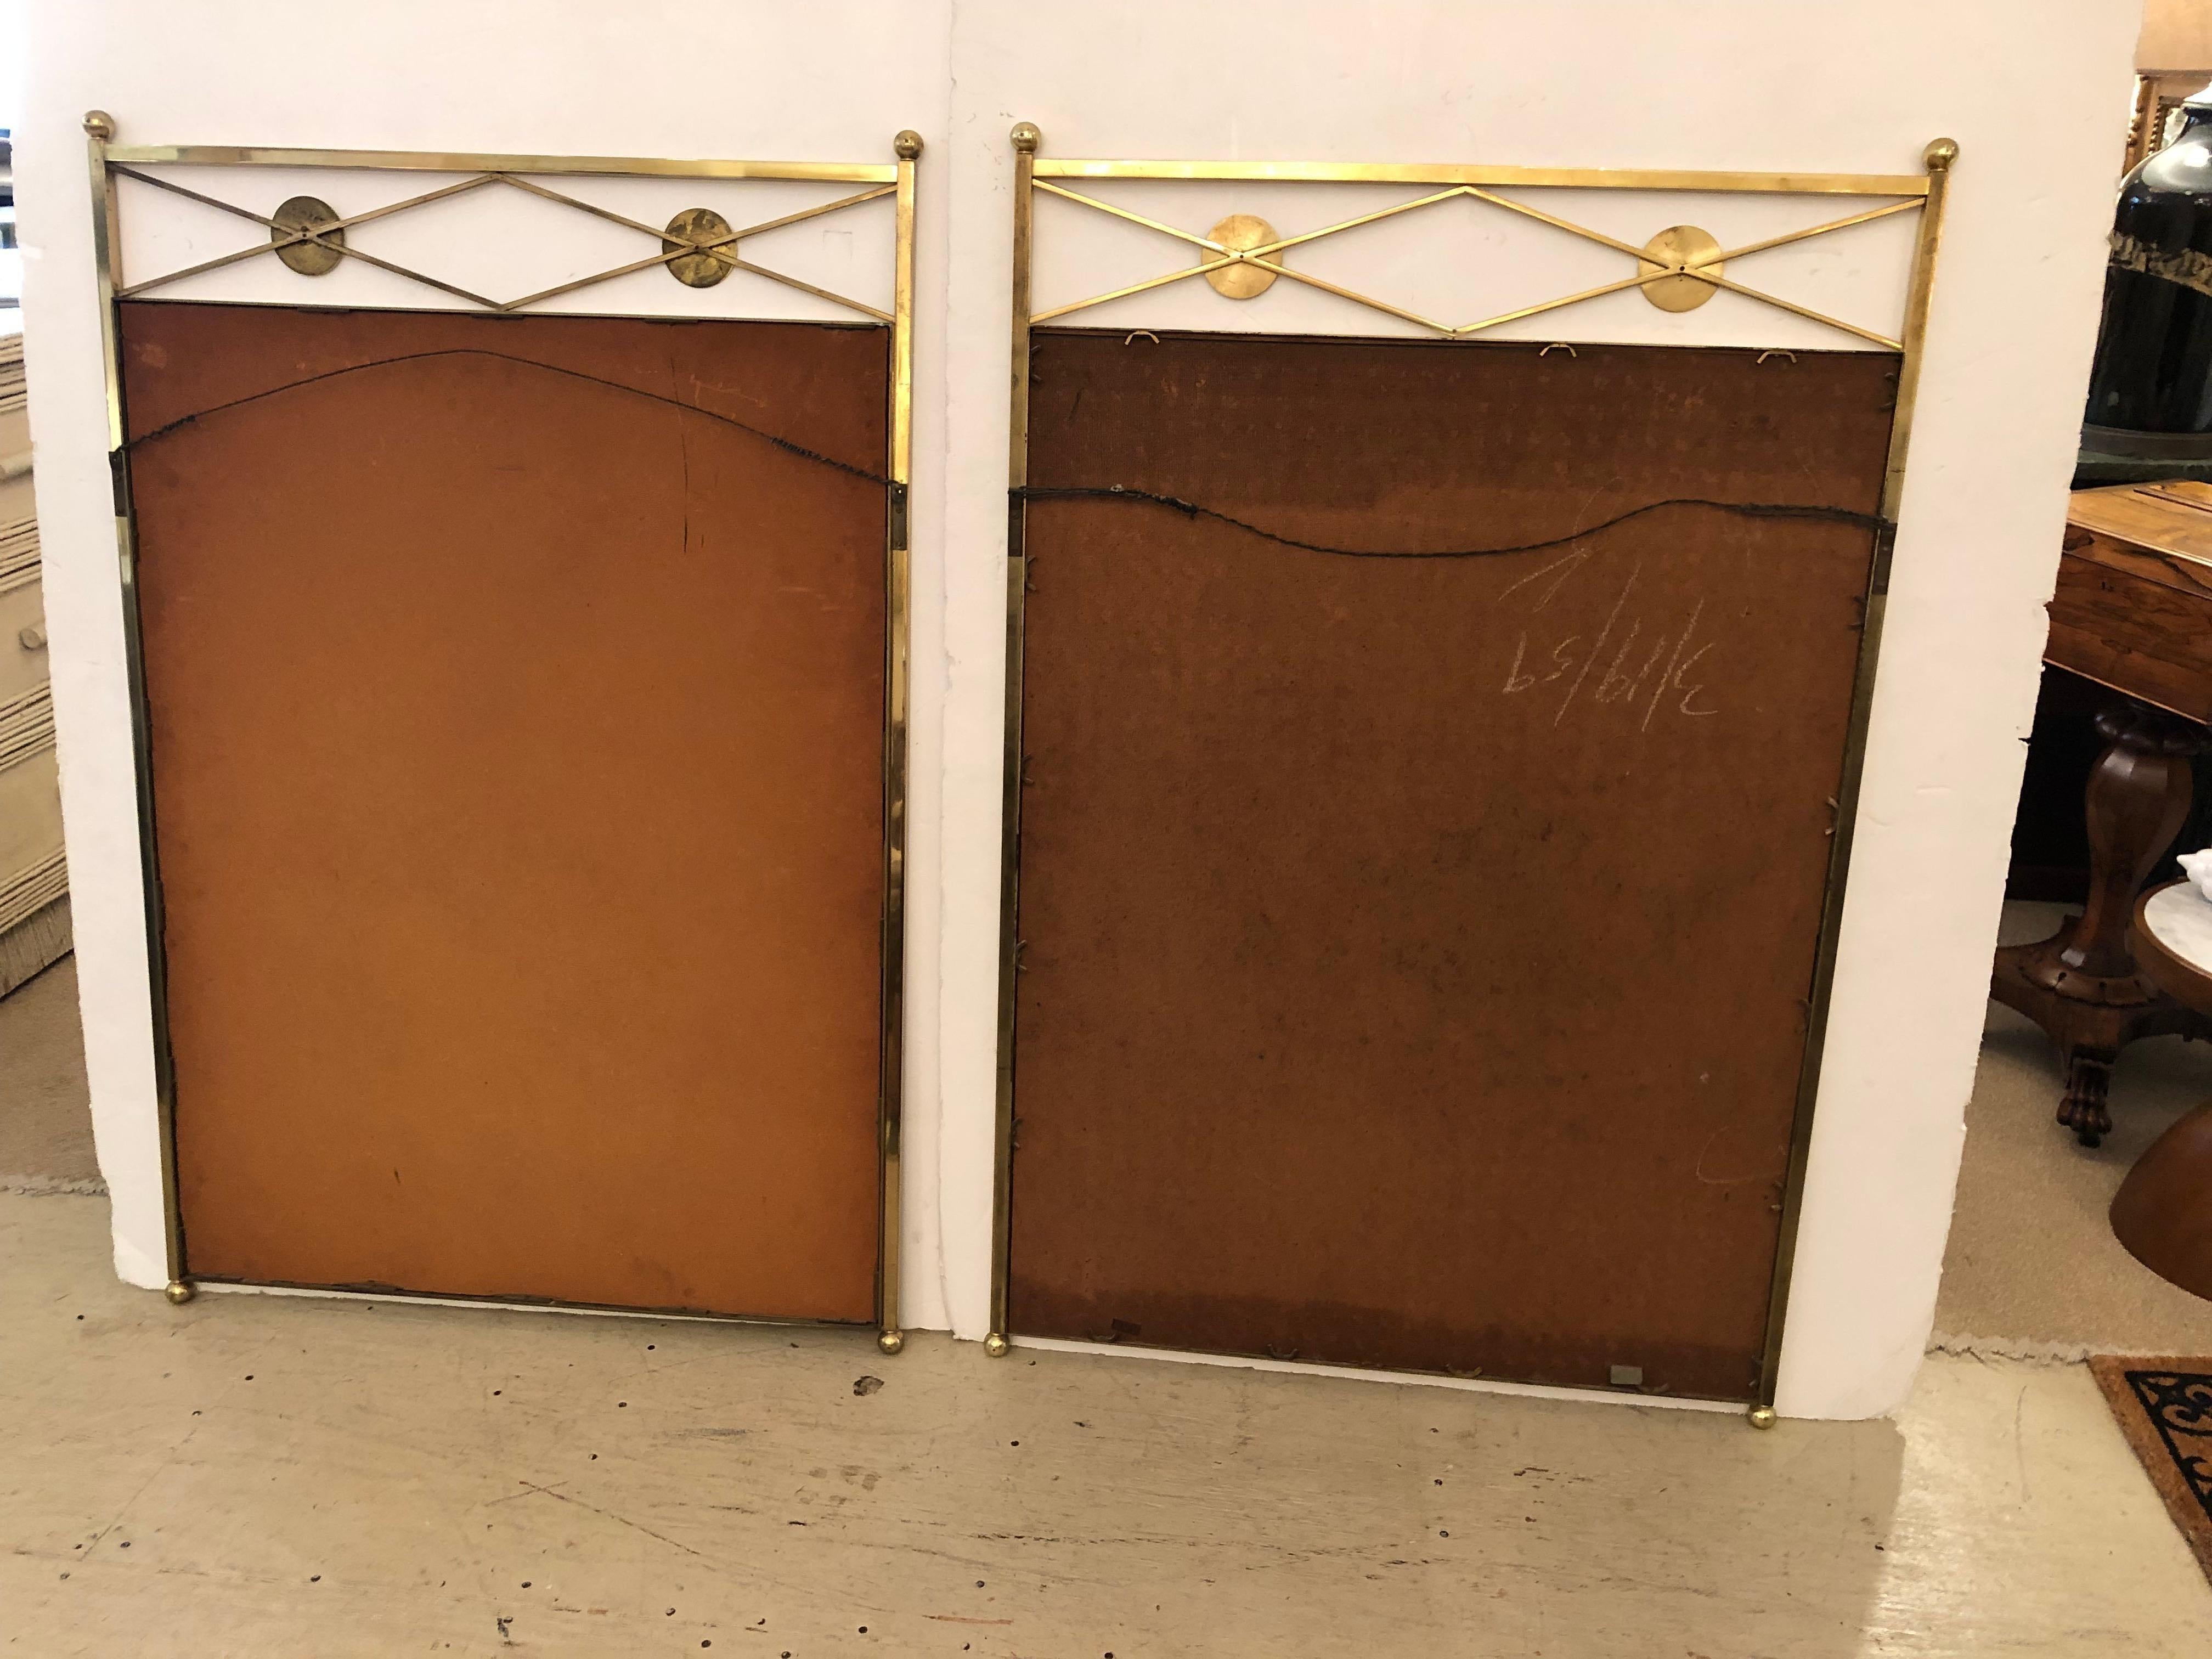 Sensational Pair of Large Solid Brass Hollywood Regency Vintage Mirrors For Sale 3